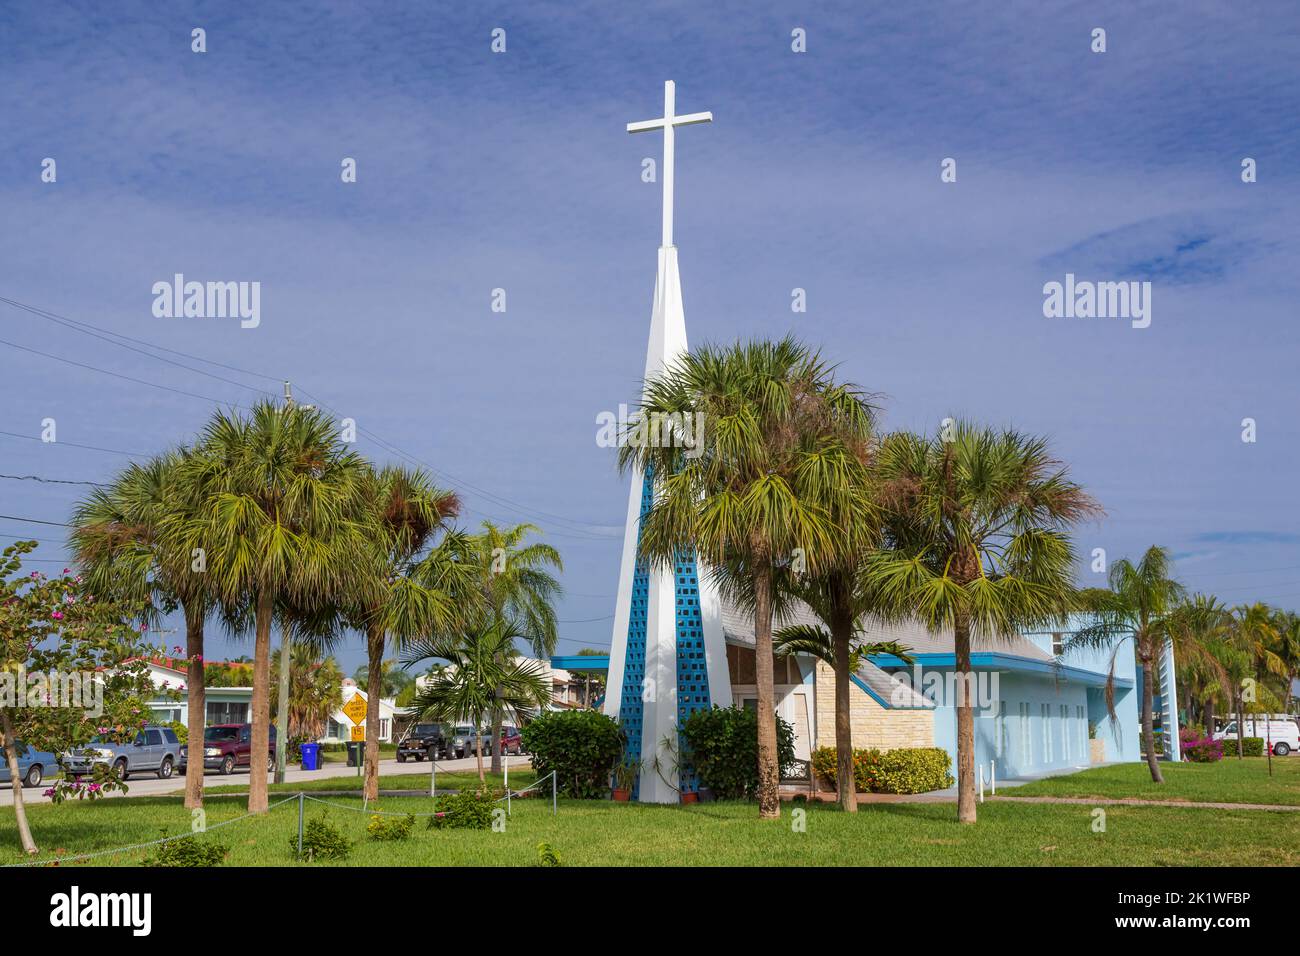 Community Church of Lauderdale by the Sea, Fort Lauderdale, Florida, USA. Stock Photo